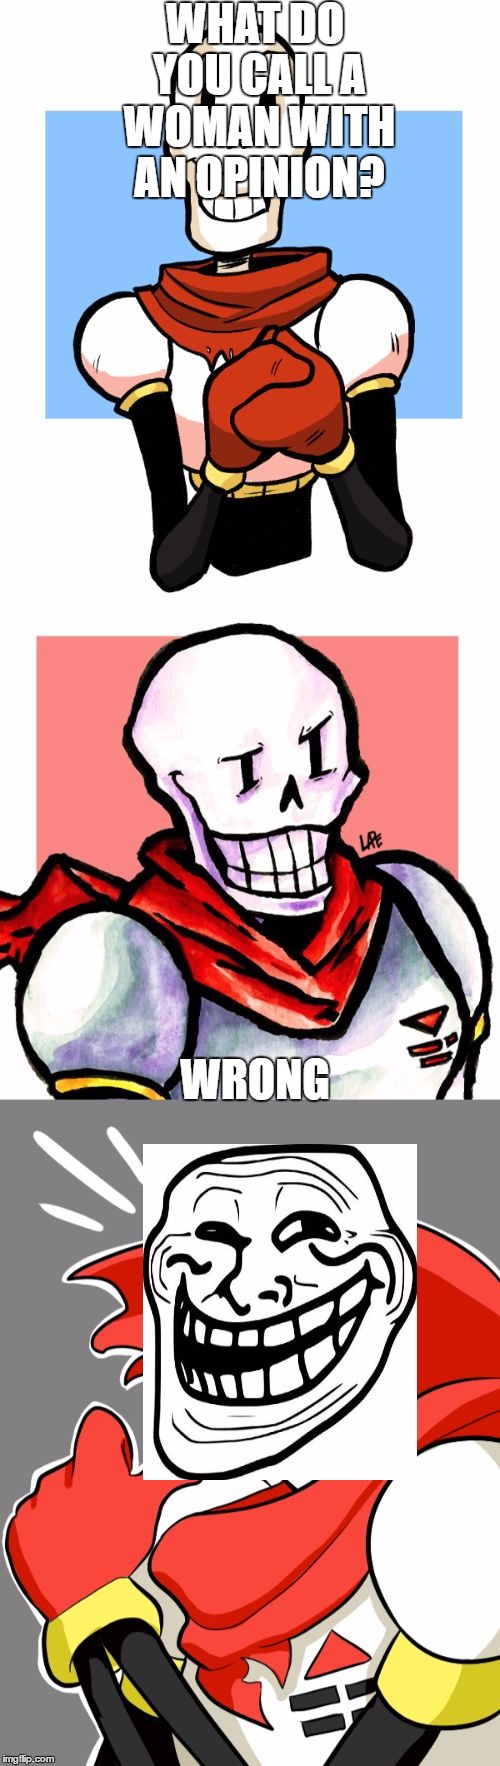 Bad Pun Papyrus | WHAT DO YOU CALL A WOMAN WITH AN OPINION? WRONG | image tagged in bad pun papyrus,gif | made w/ Imgflip meme maker